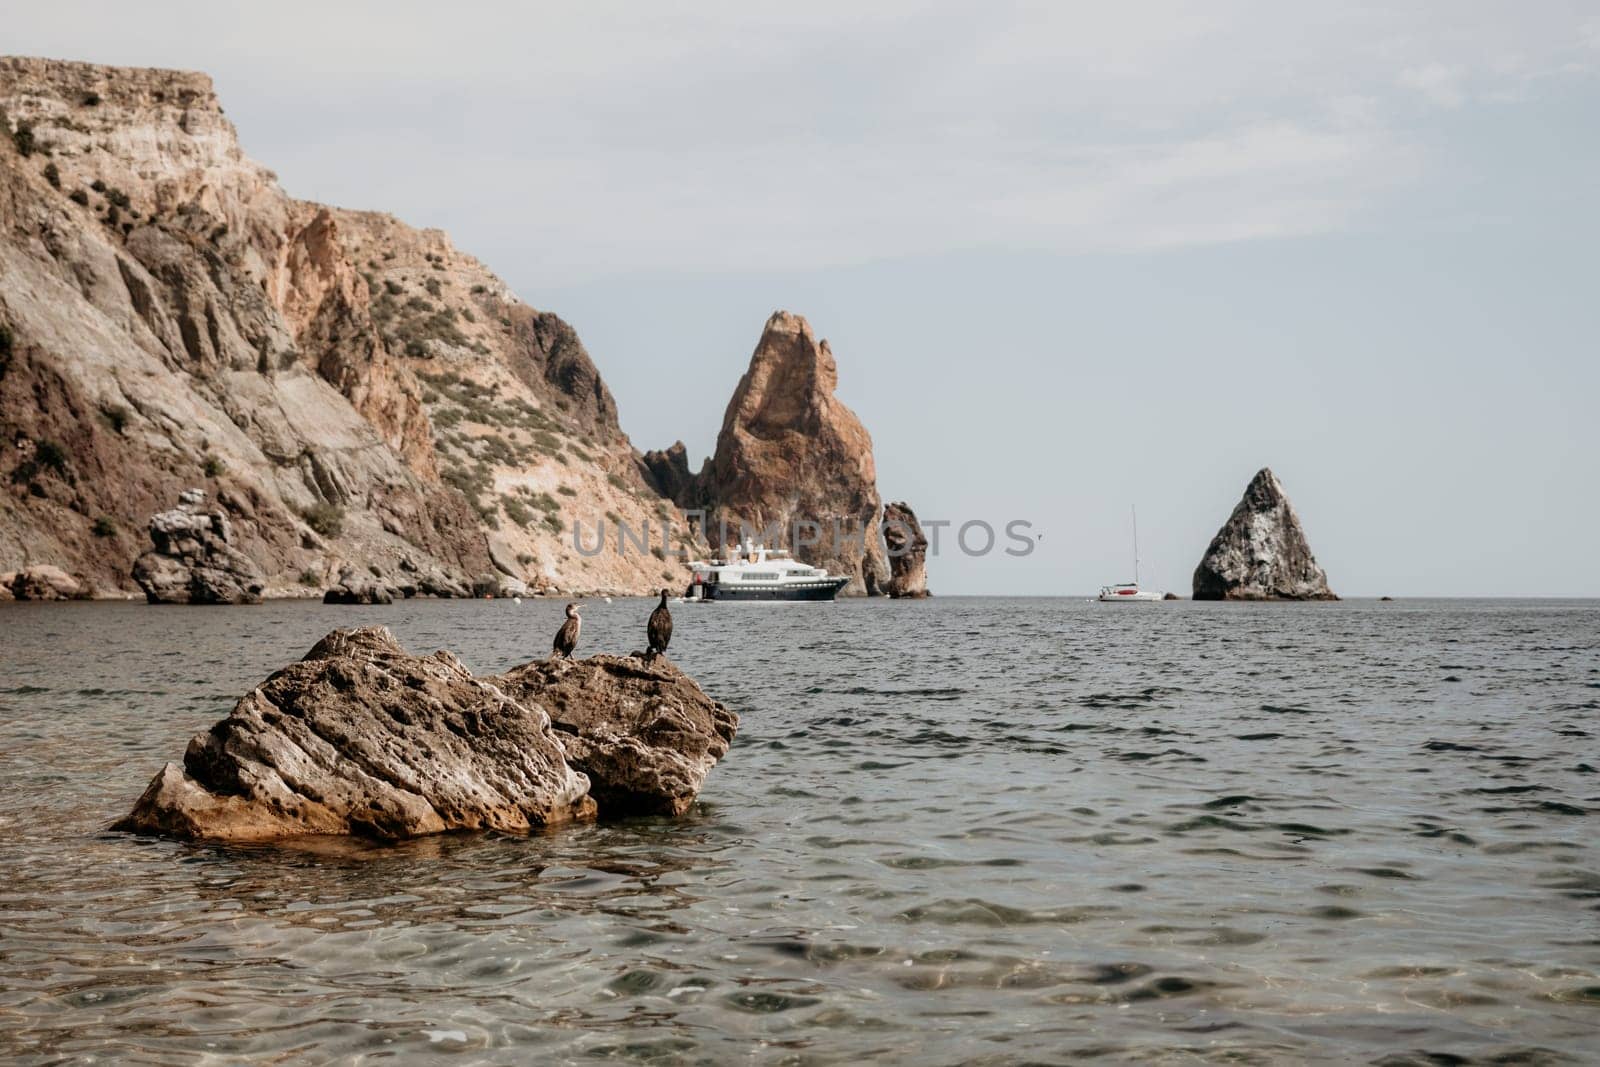 Remote beach, calm sea with volcanic rocky shores, with small waves on the water surface. The summer ocean beach, a holiday, vacation, and travel concept with a focus on natural scenery. Nobody by panophotograph